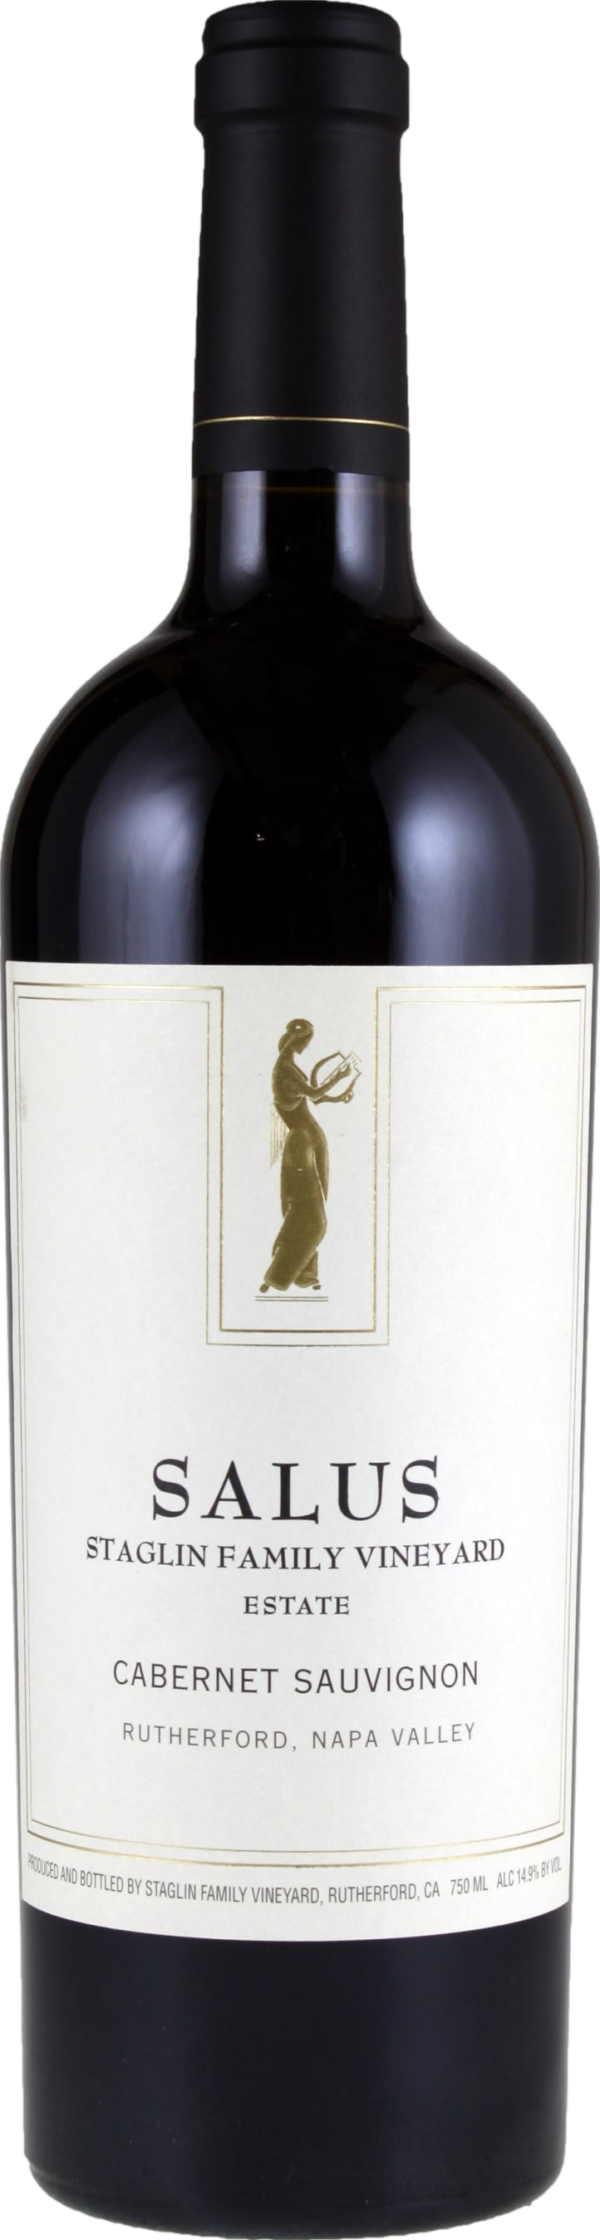 Product image of Staglin Salus Estate Cabernet Sauvignon 2019 from 8wines